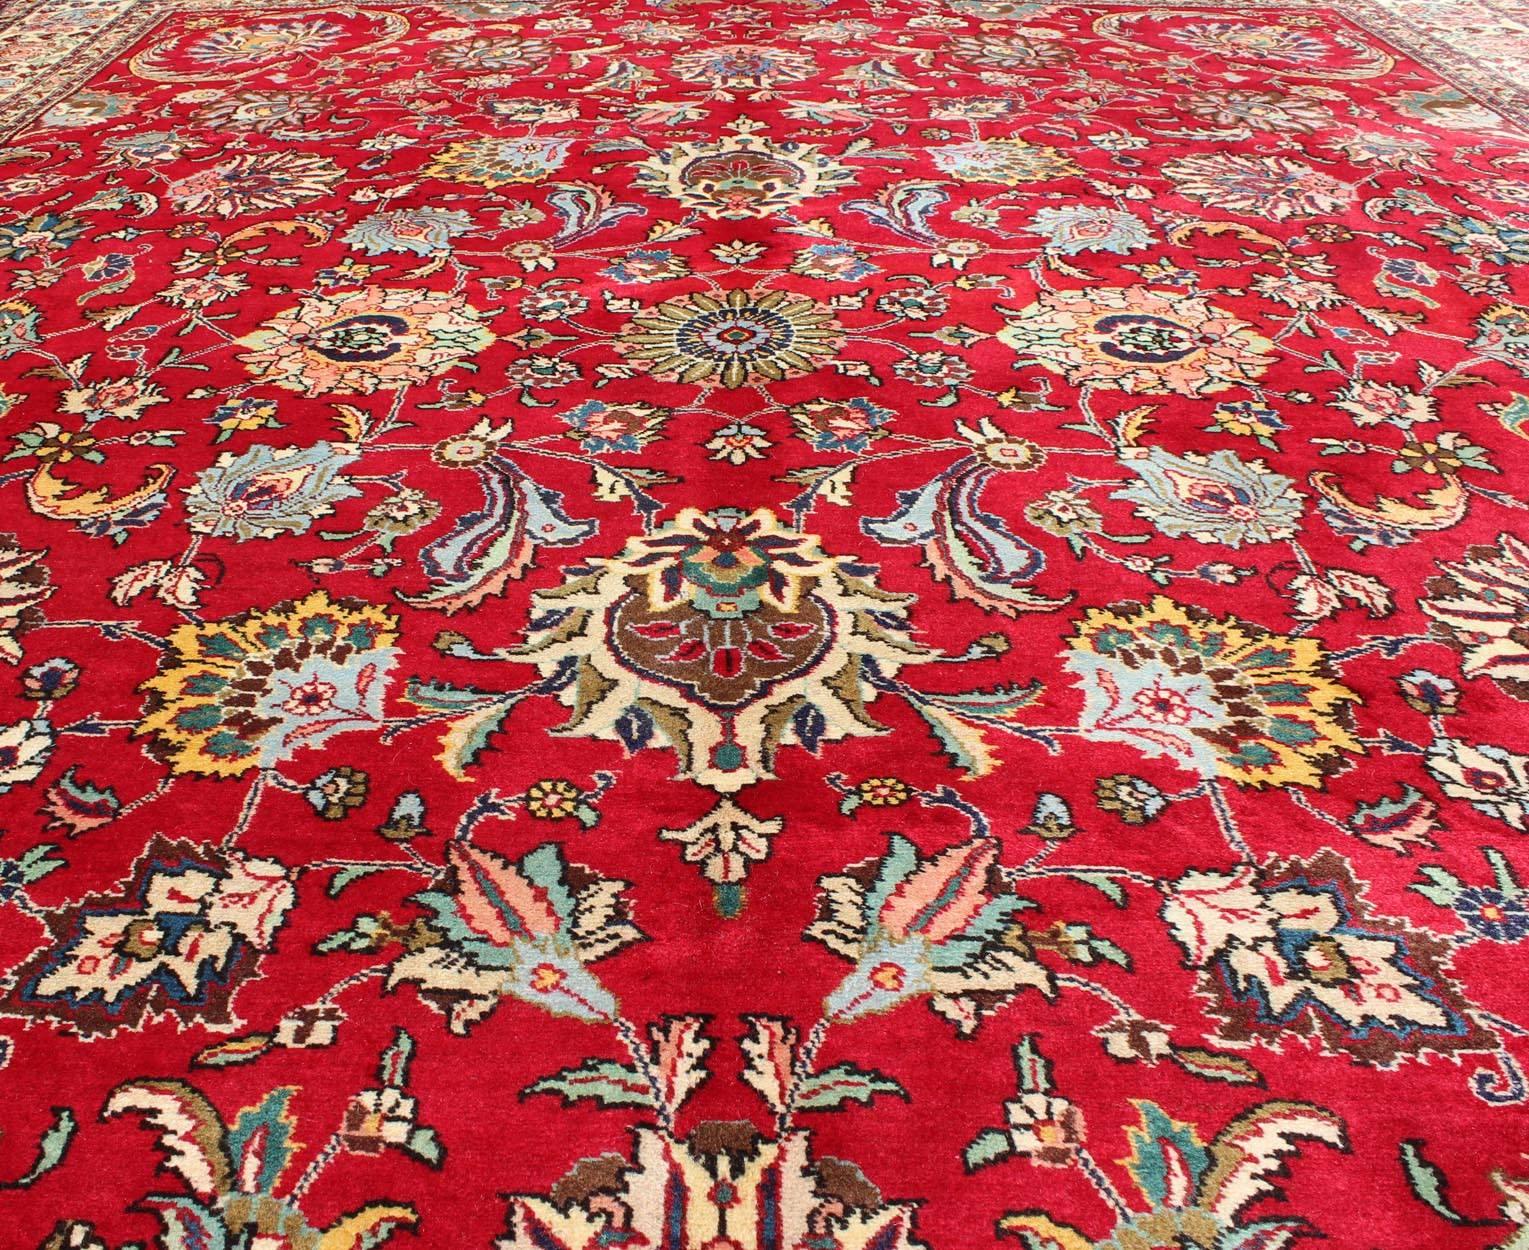 Semi Antique Persian Tabriz Rug with All-Over Blossom Design In Red and Ivory  For Sale 5